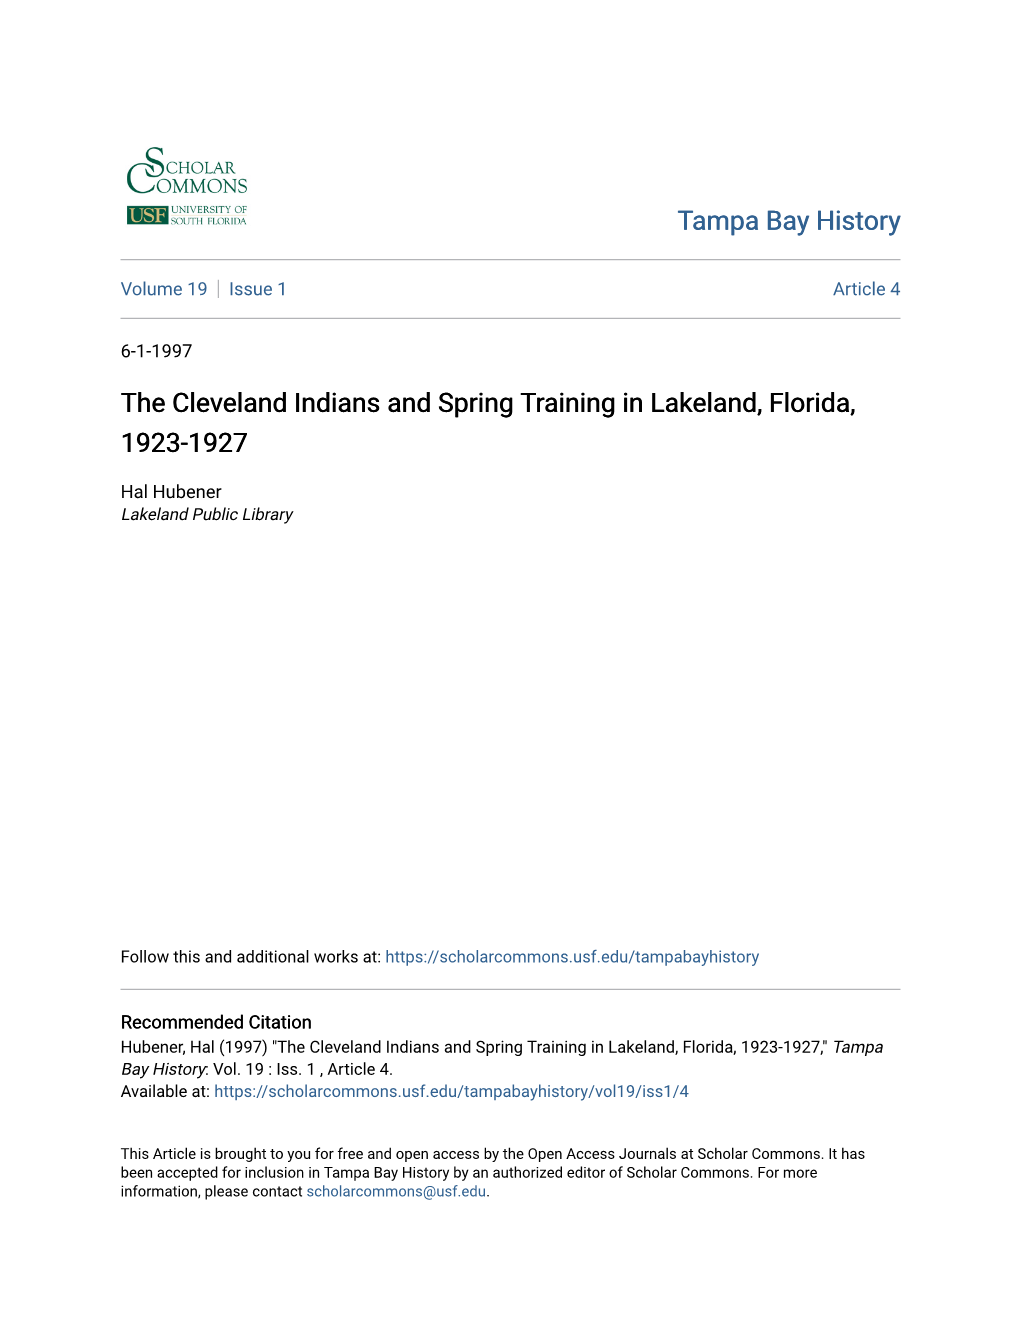 The Cleveland Indians and Spring Training in Lakeland, Florida, 1923-1927